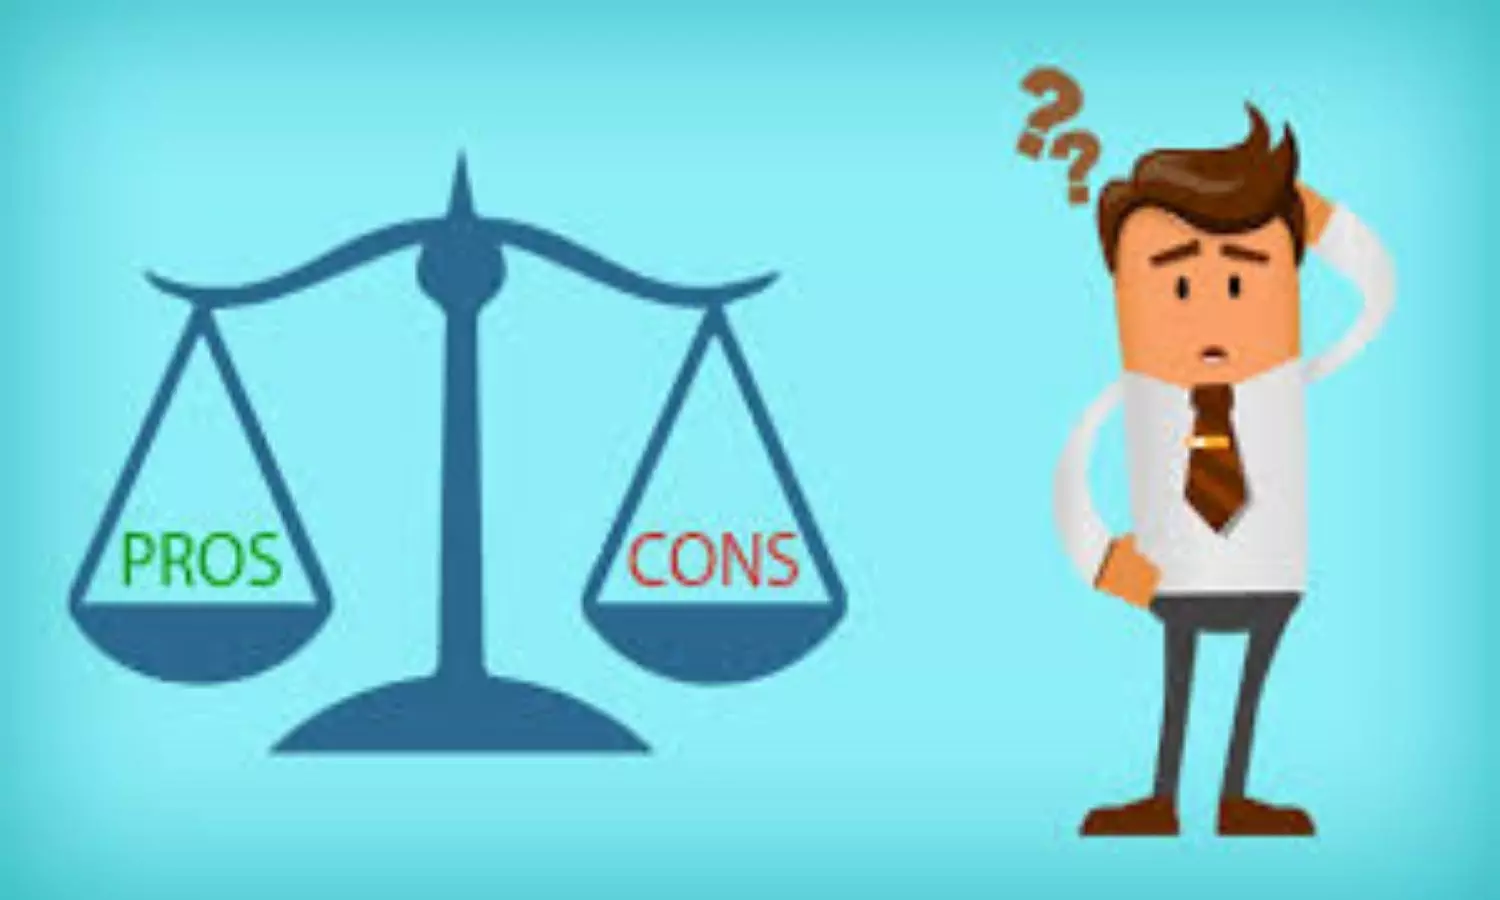 Have You Applied For A Personal Loan Learn About The Pros And Cons